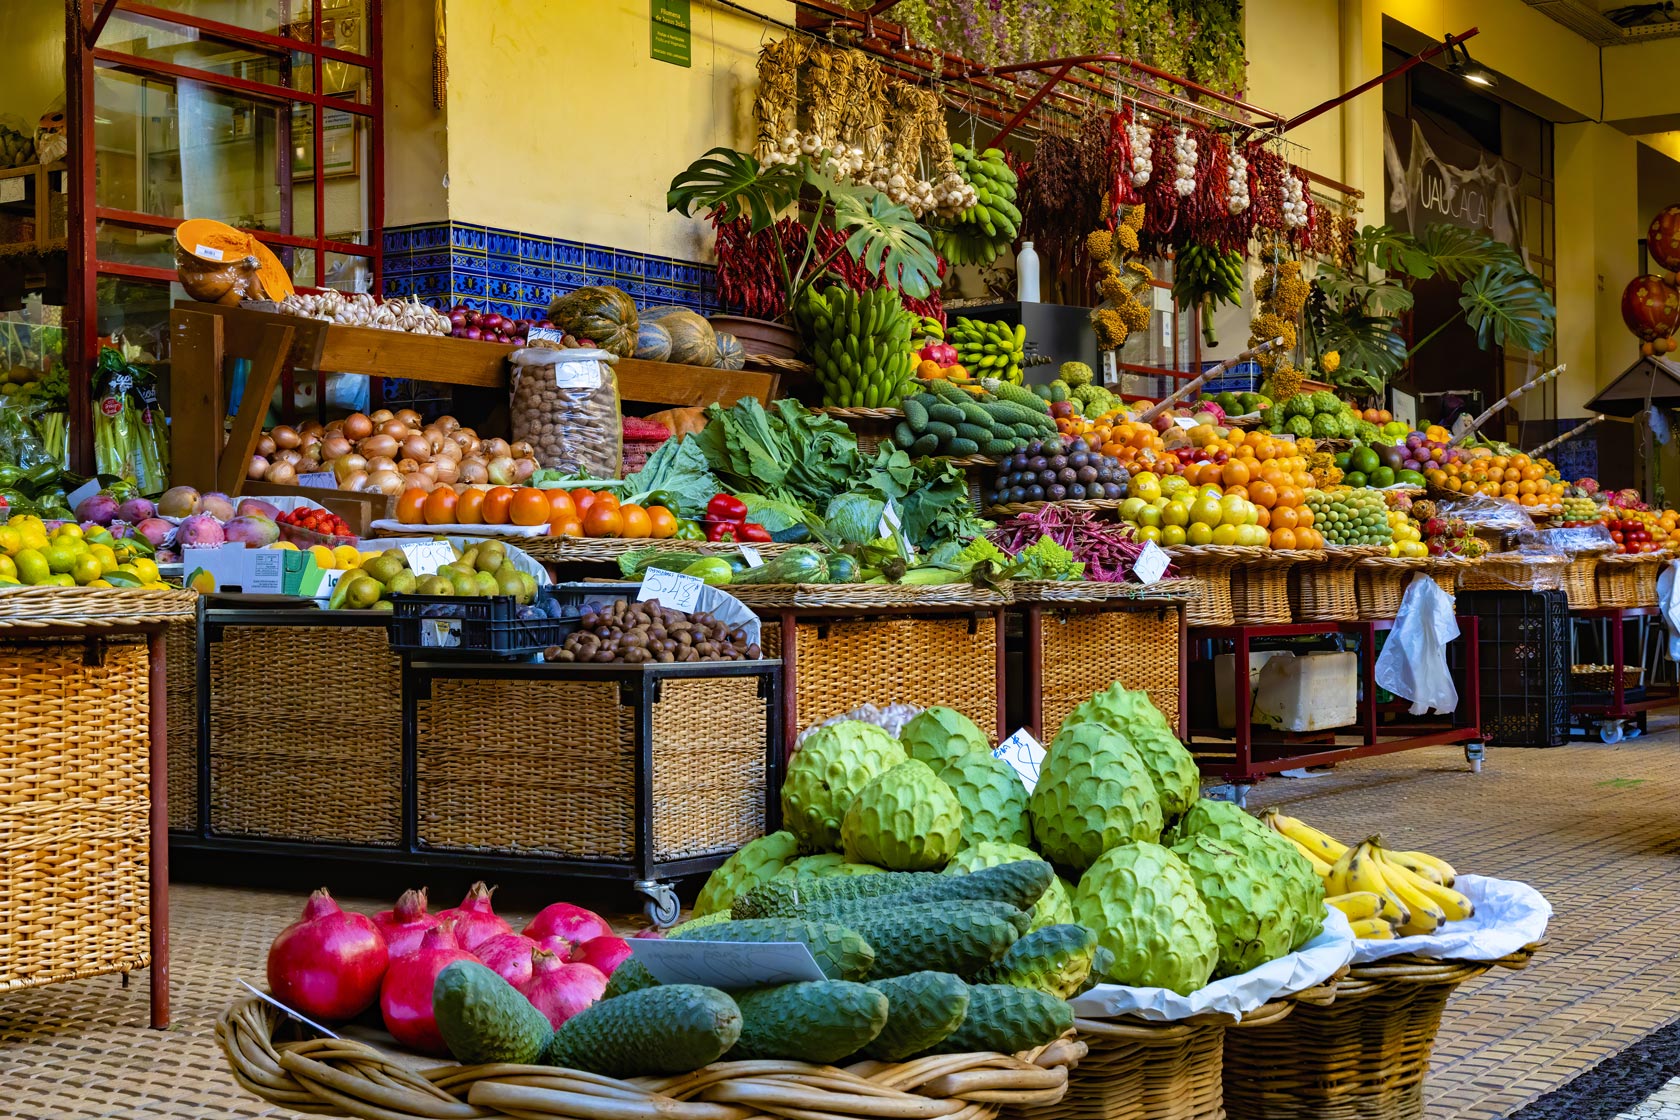 This open market is a hive color and high-energy, where you can buy any of Madeira's specialties from fresh fish and vegetables to exotic flowers and local crafts.